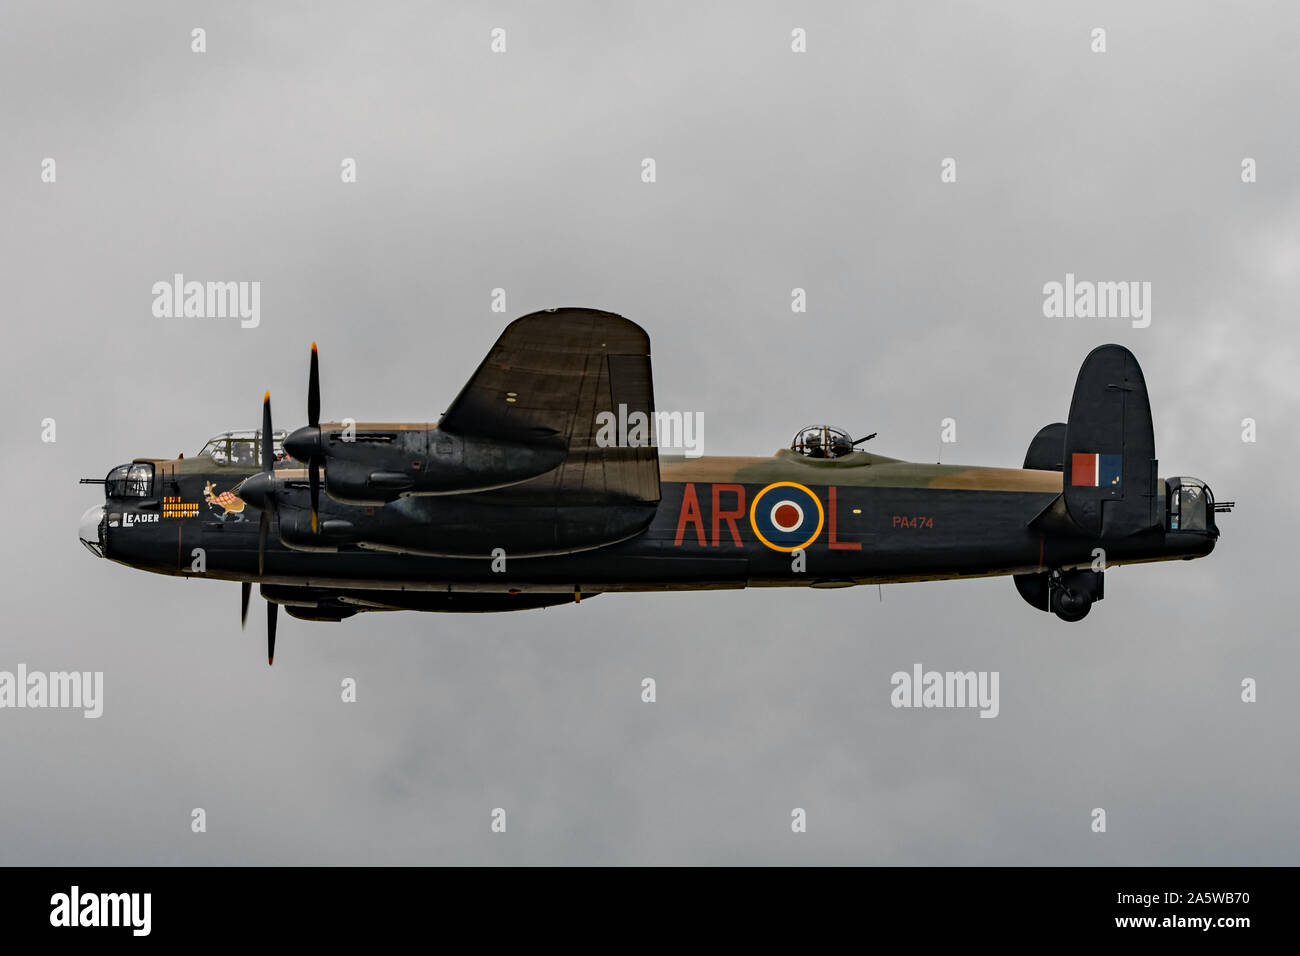 The Royal Air Force Lancaster bomber (PA474) of the Battle of Britain Memorial Flight in level flight at RIAT 2019, RAF Fairford, UK on 21/7/19. Stock Photo